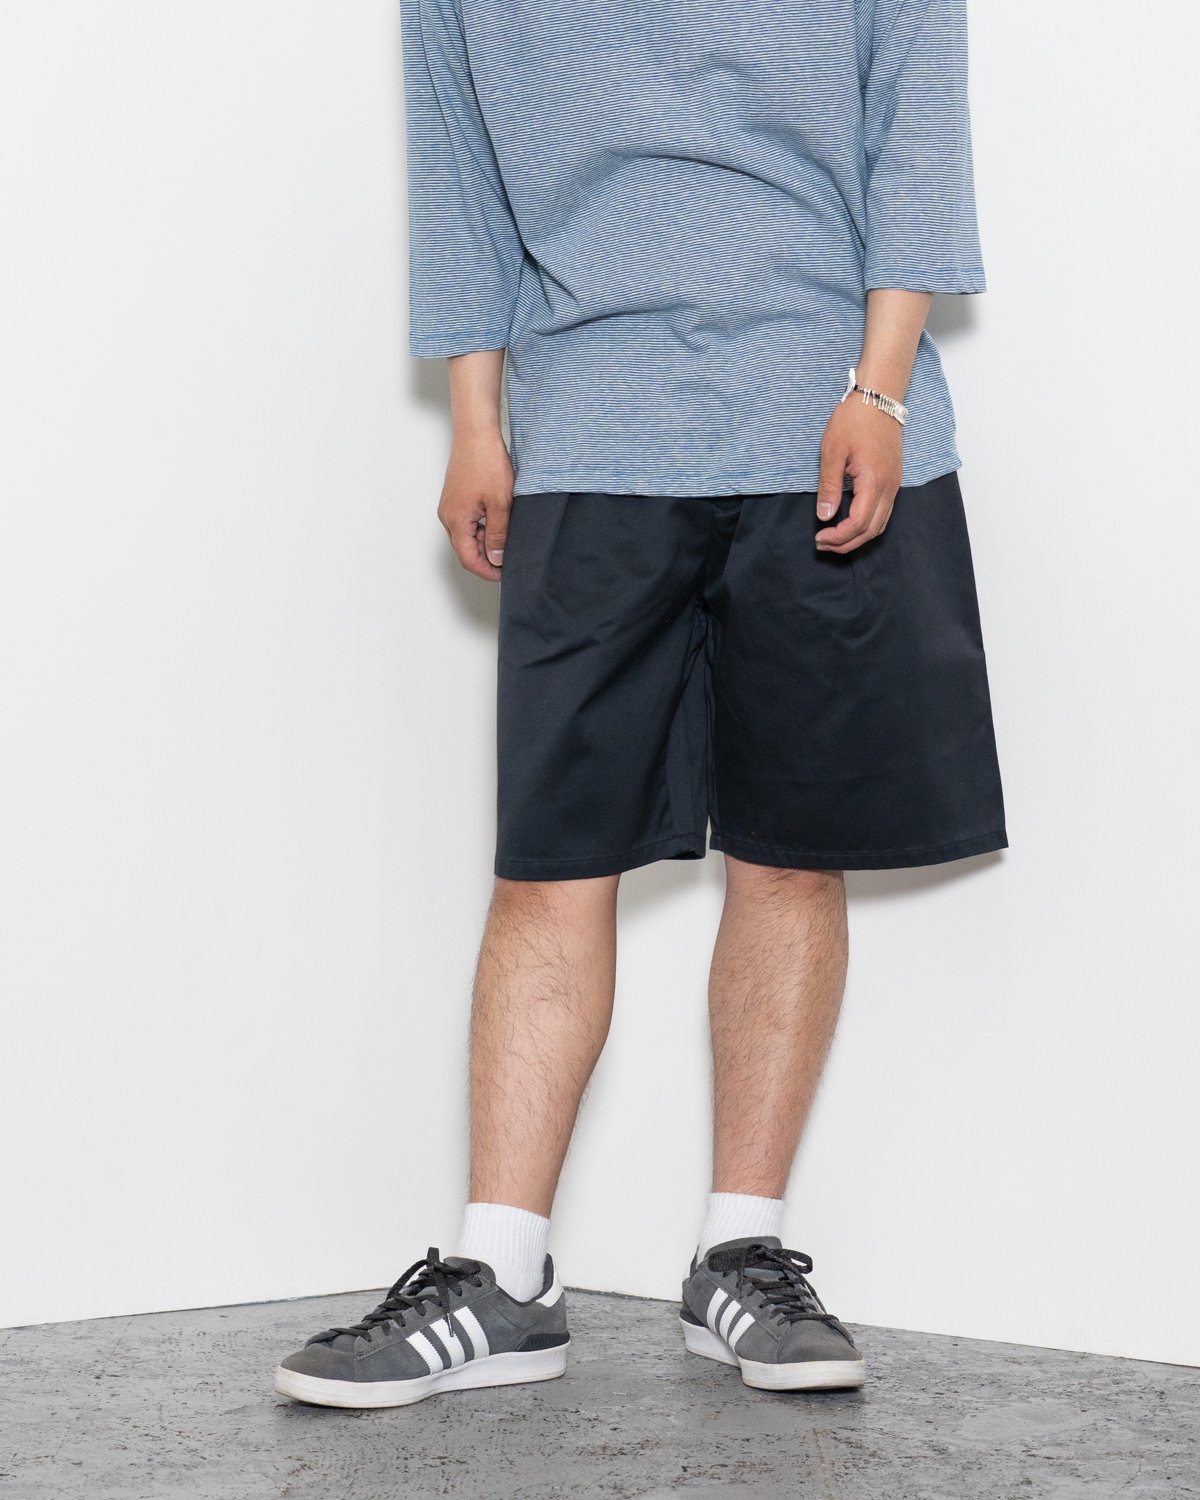 FARAH * M4026 Two-Tuck Wide Shorts West Point(2色展開)